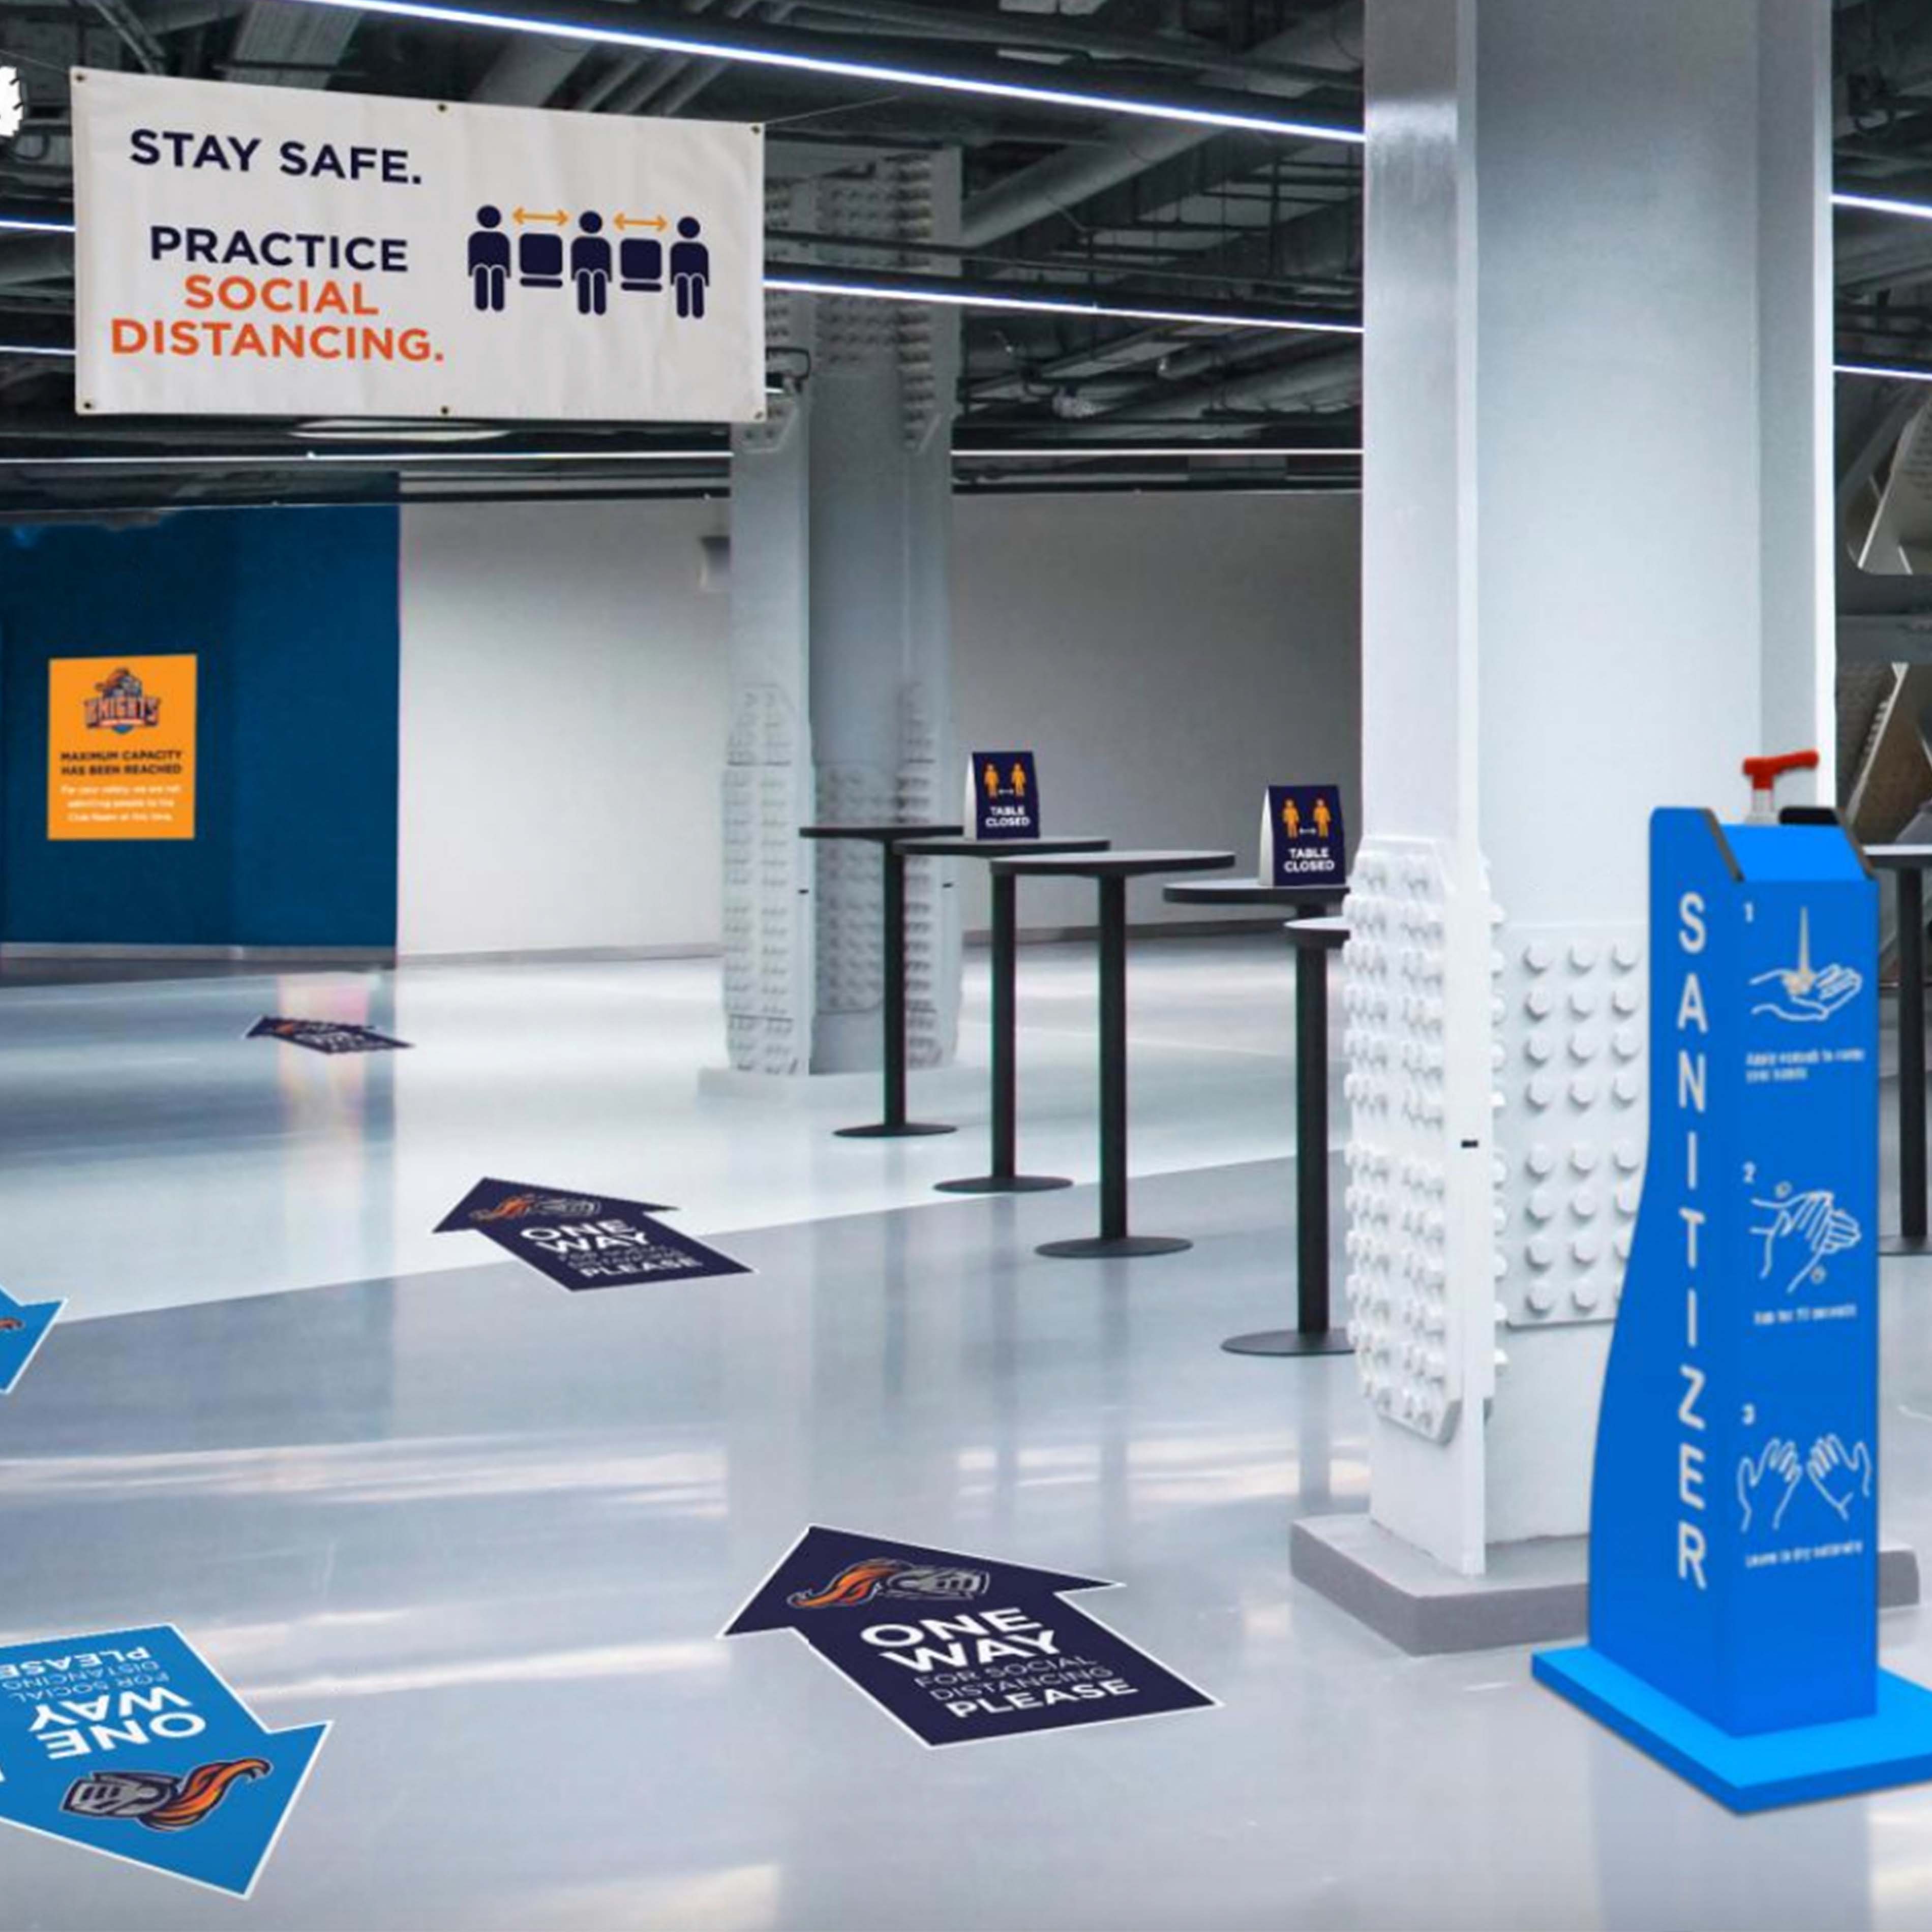 stadium entrance with floor decals, banner and sanitizer station